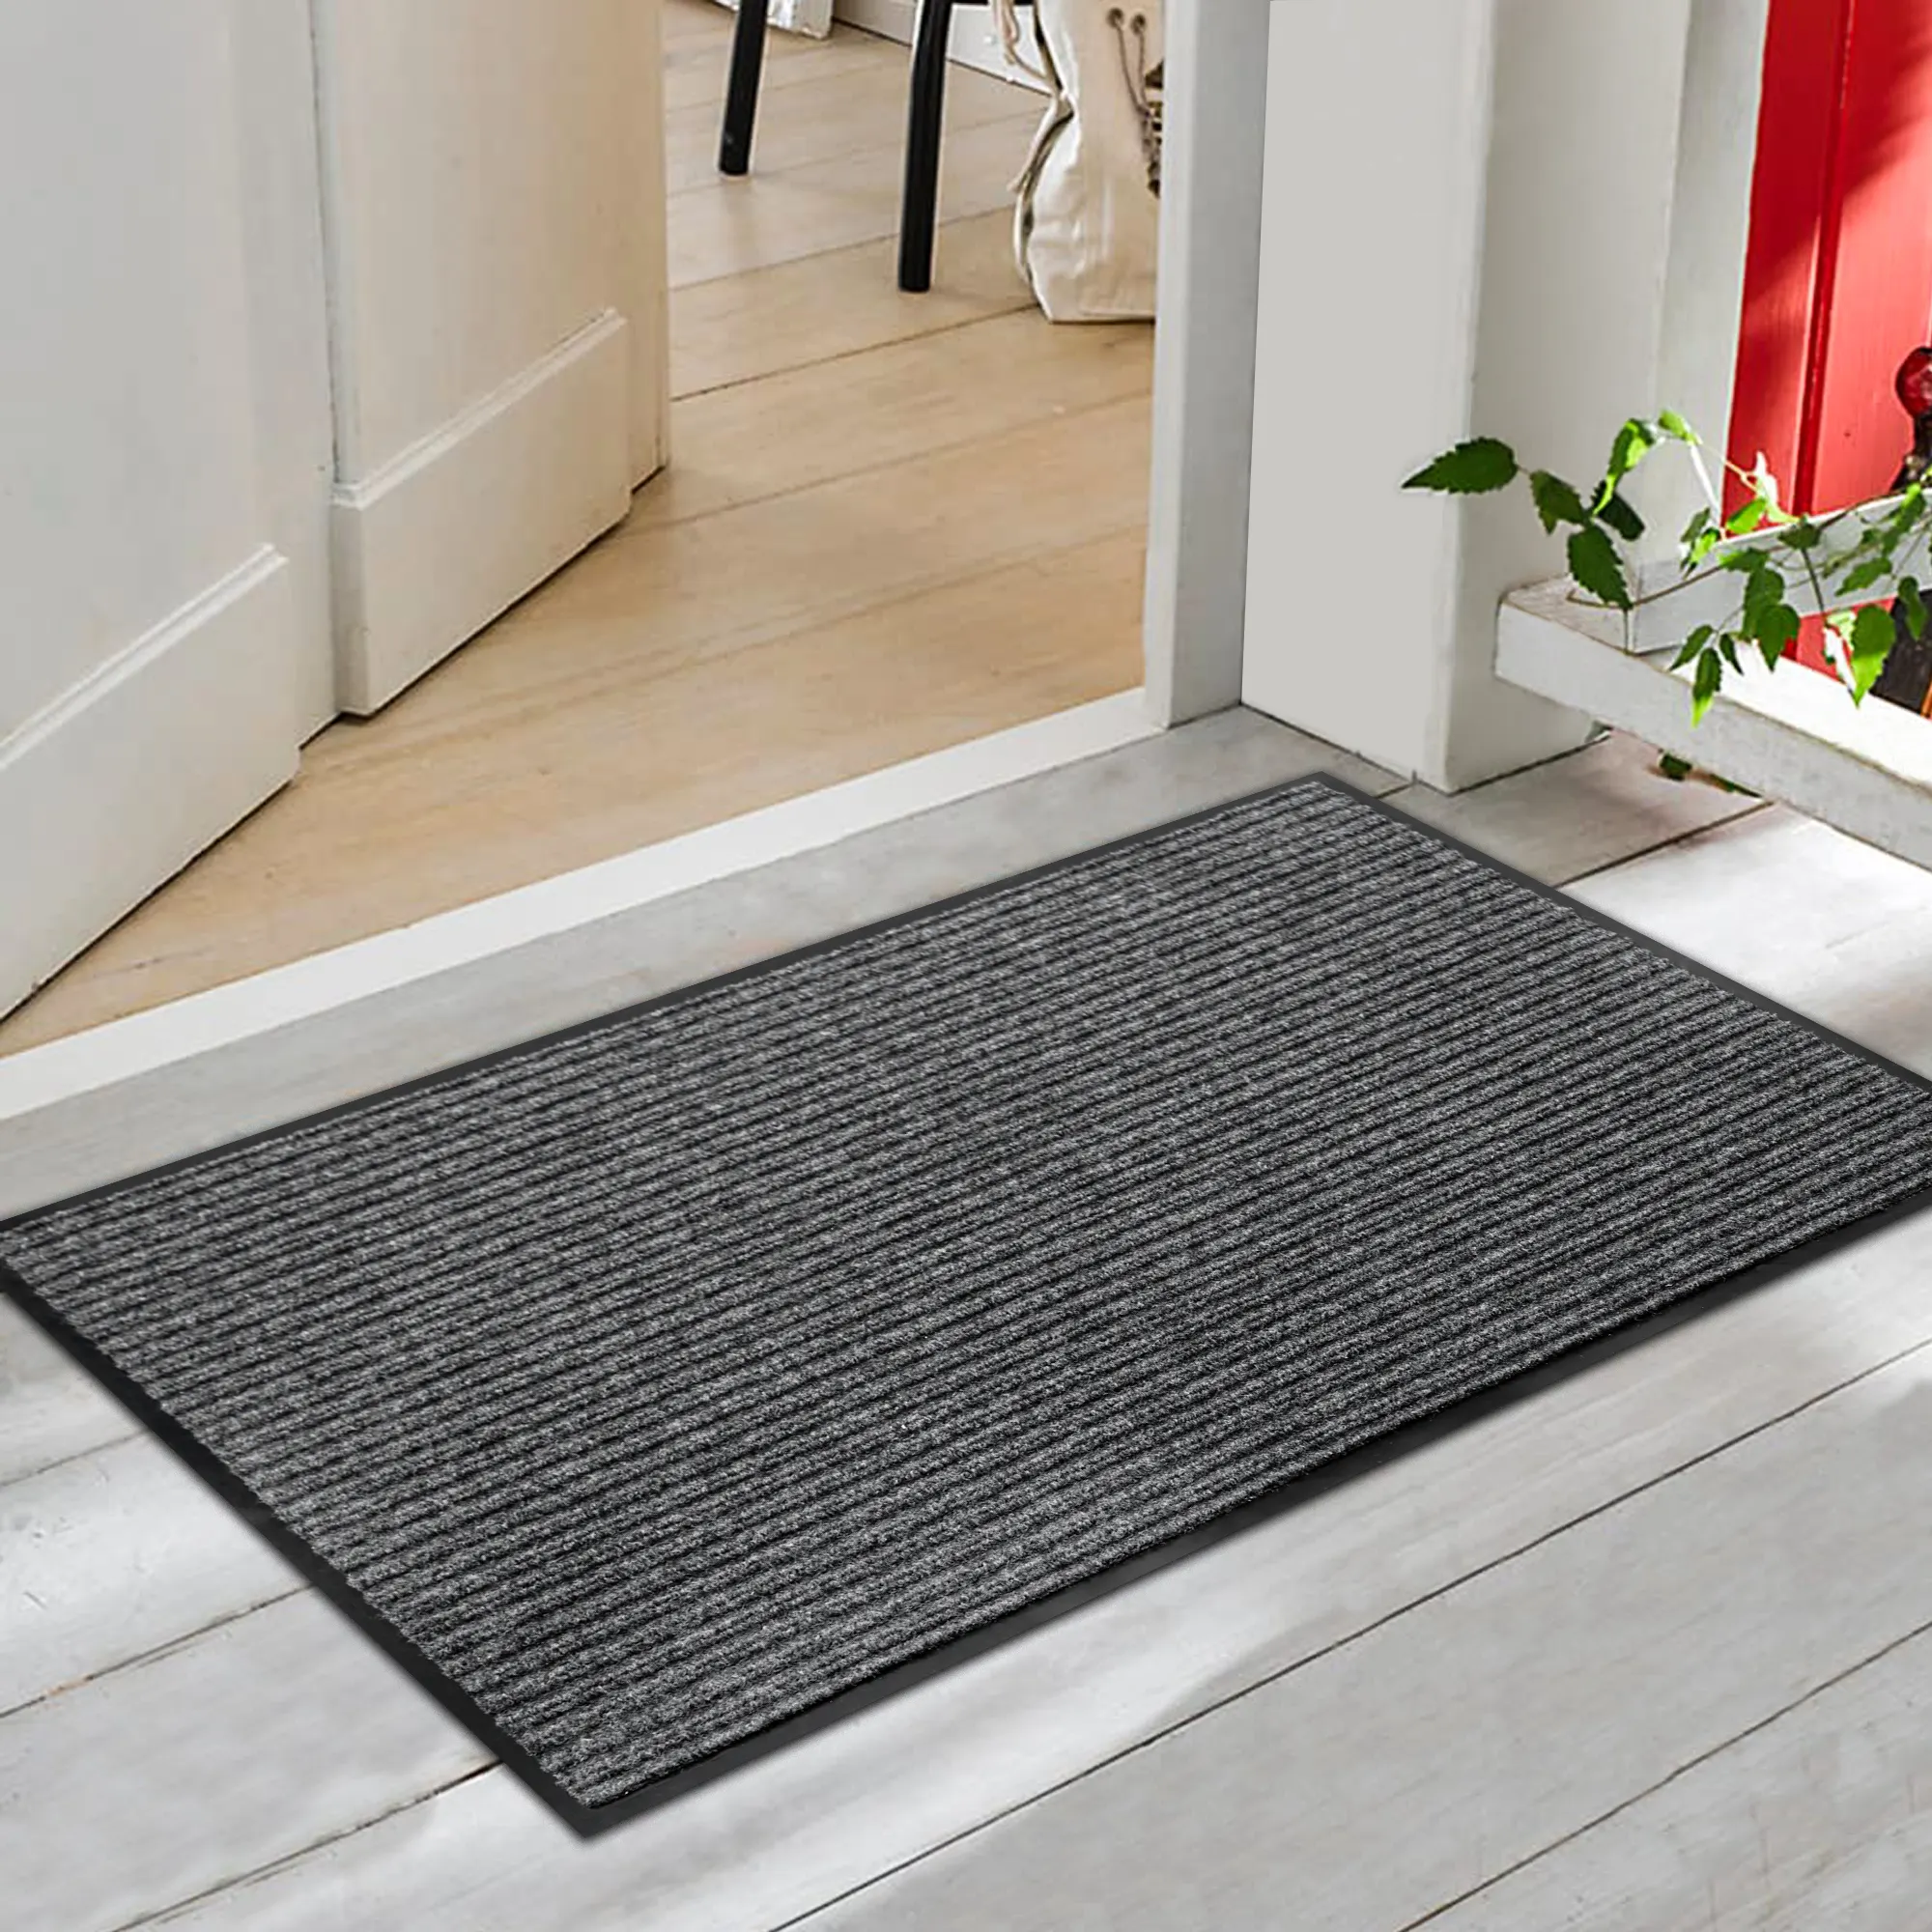 High quality fashionable and minimalist black gray curly fur surface floor mat for entering households